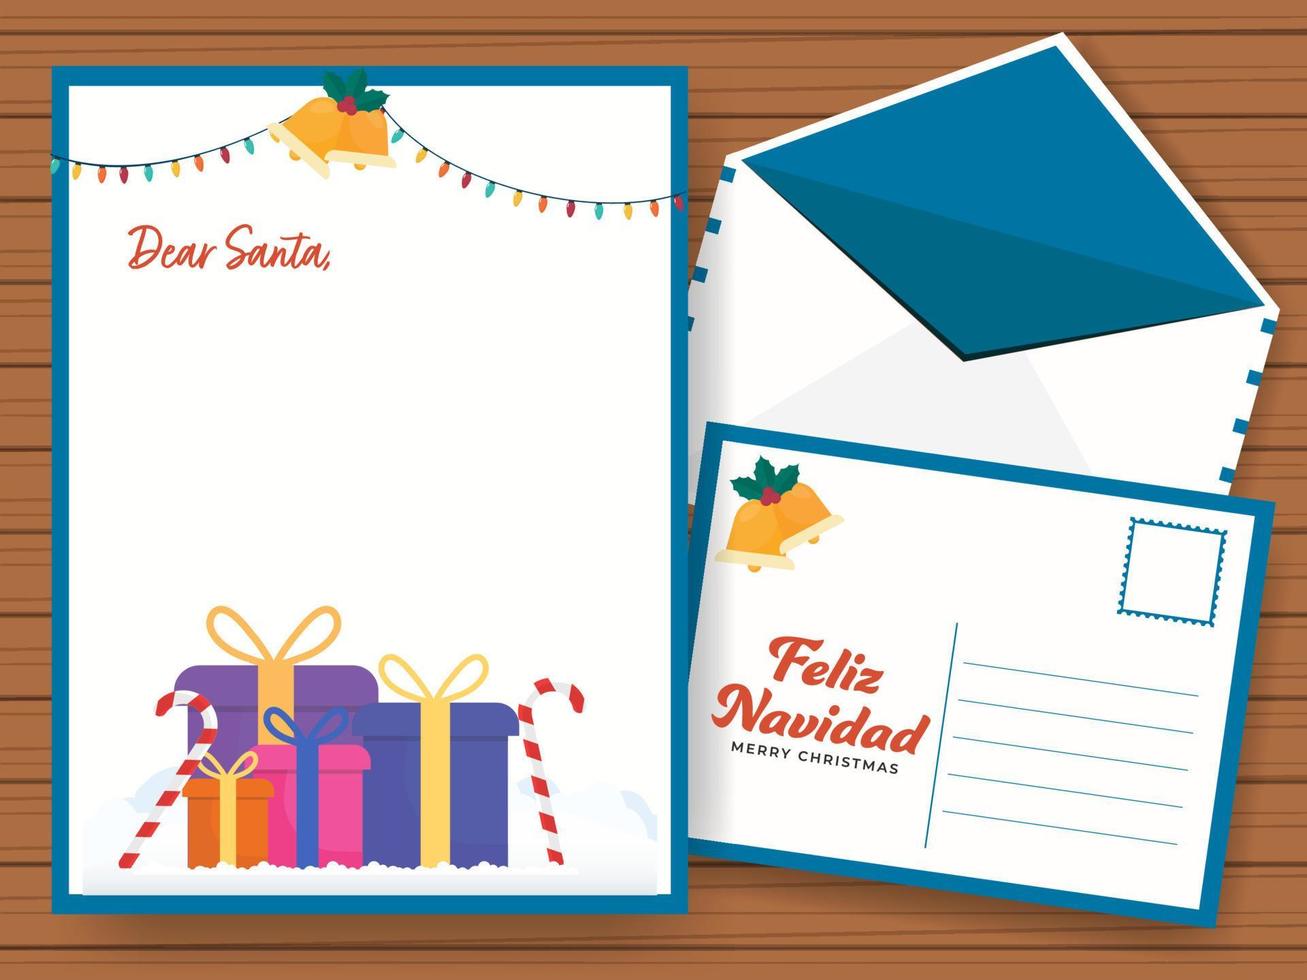 Merry Christmas Greeting Card With Double-Sides Envelope For Dear Santa. vector